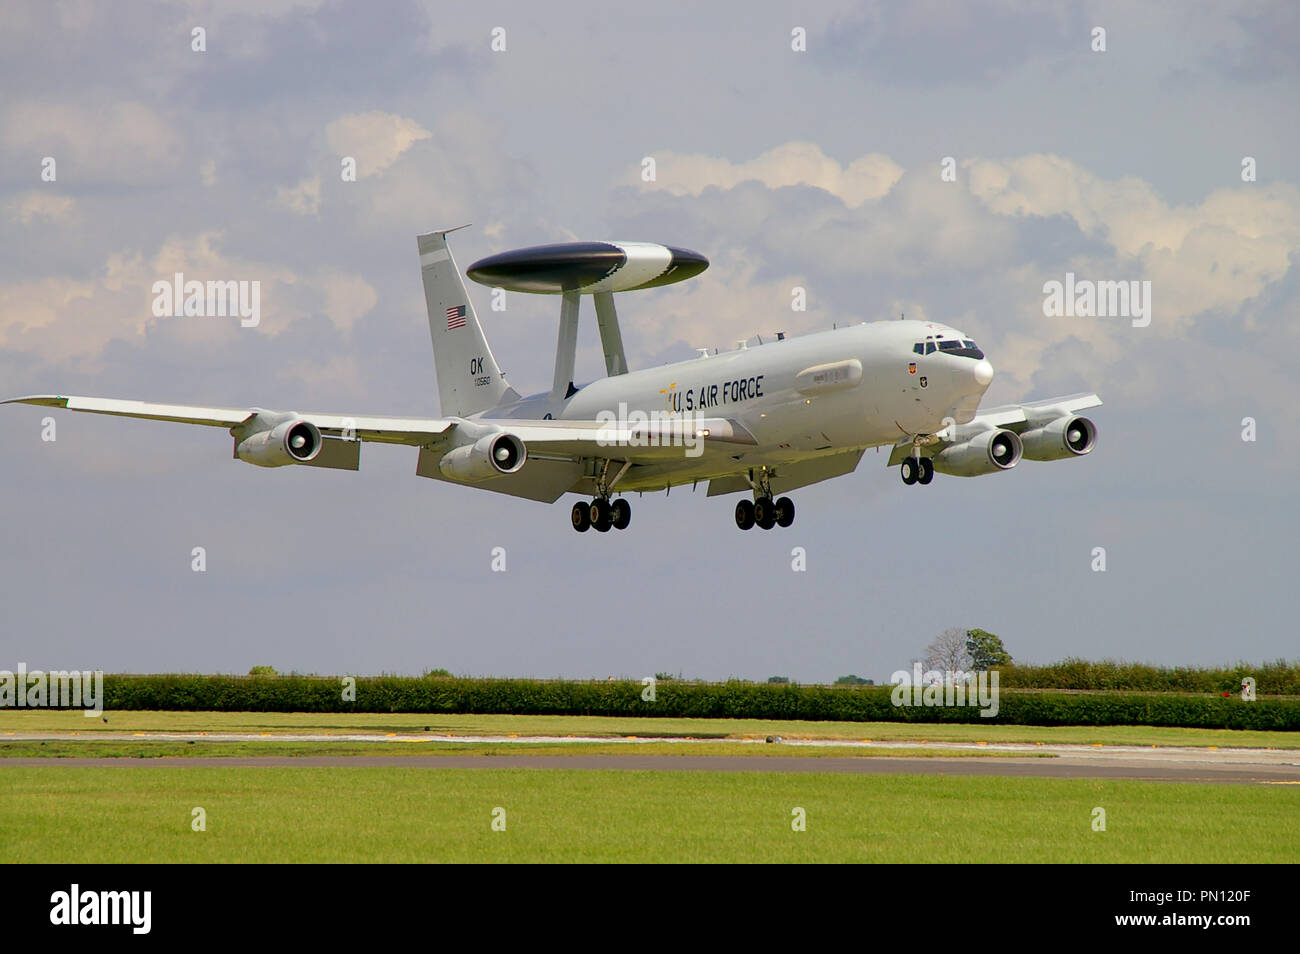 Us Air Force Boeing E 3 Sentry Awacs Plane Landing At Raf Waddington Airborne Early Warning And Control Aew C Jet Aircraft Based On 707 Stock Photo Alamy